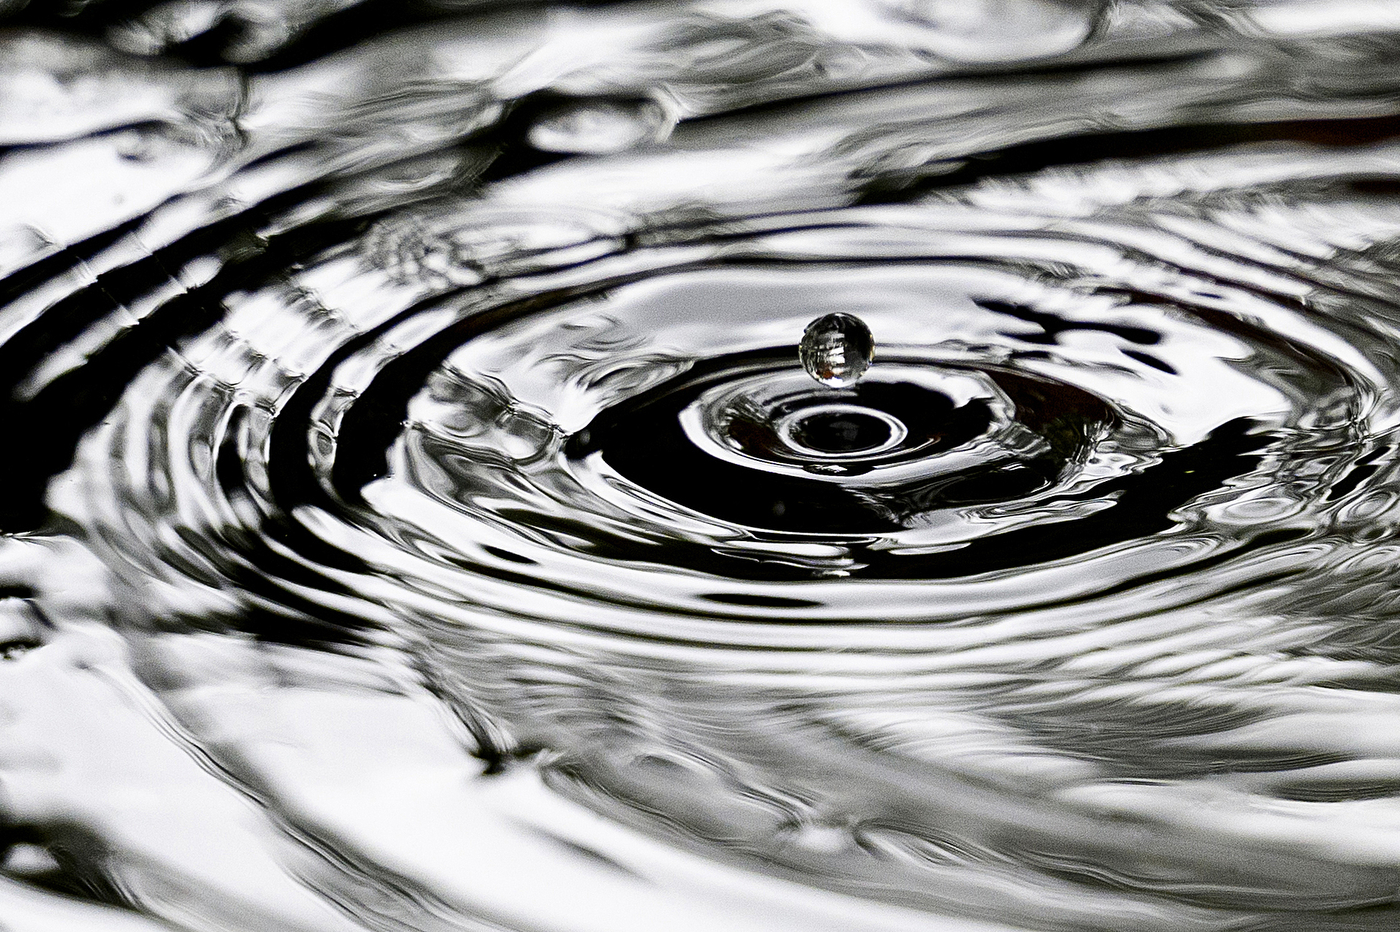 A water droplet hovering over a pool of water.